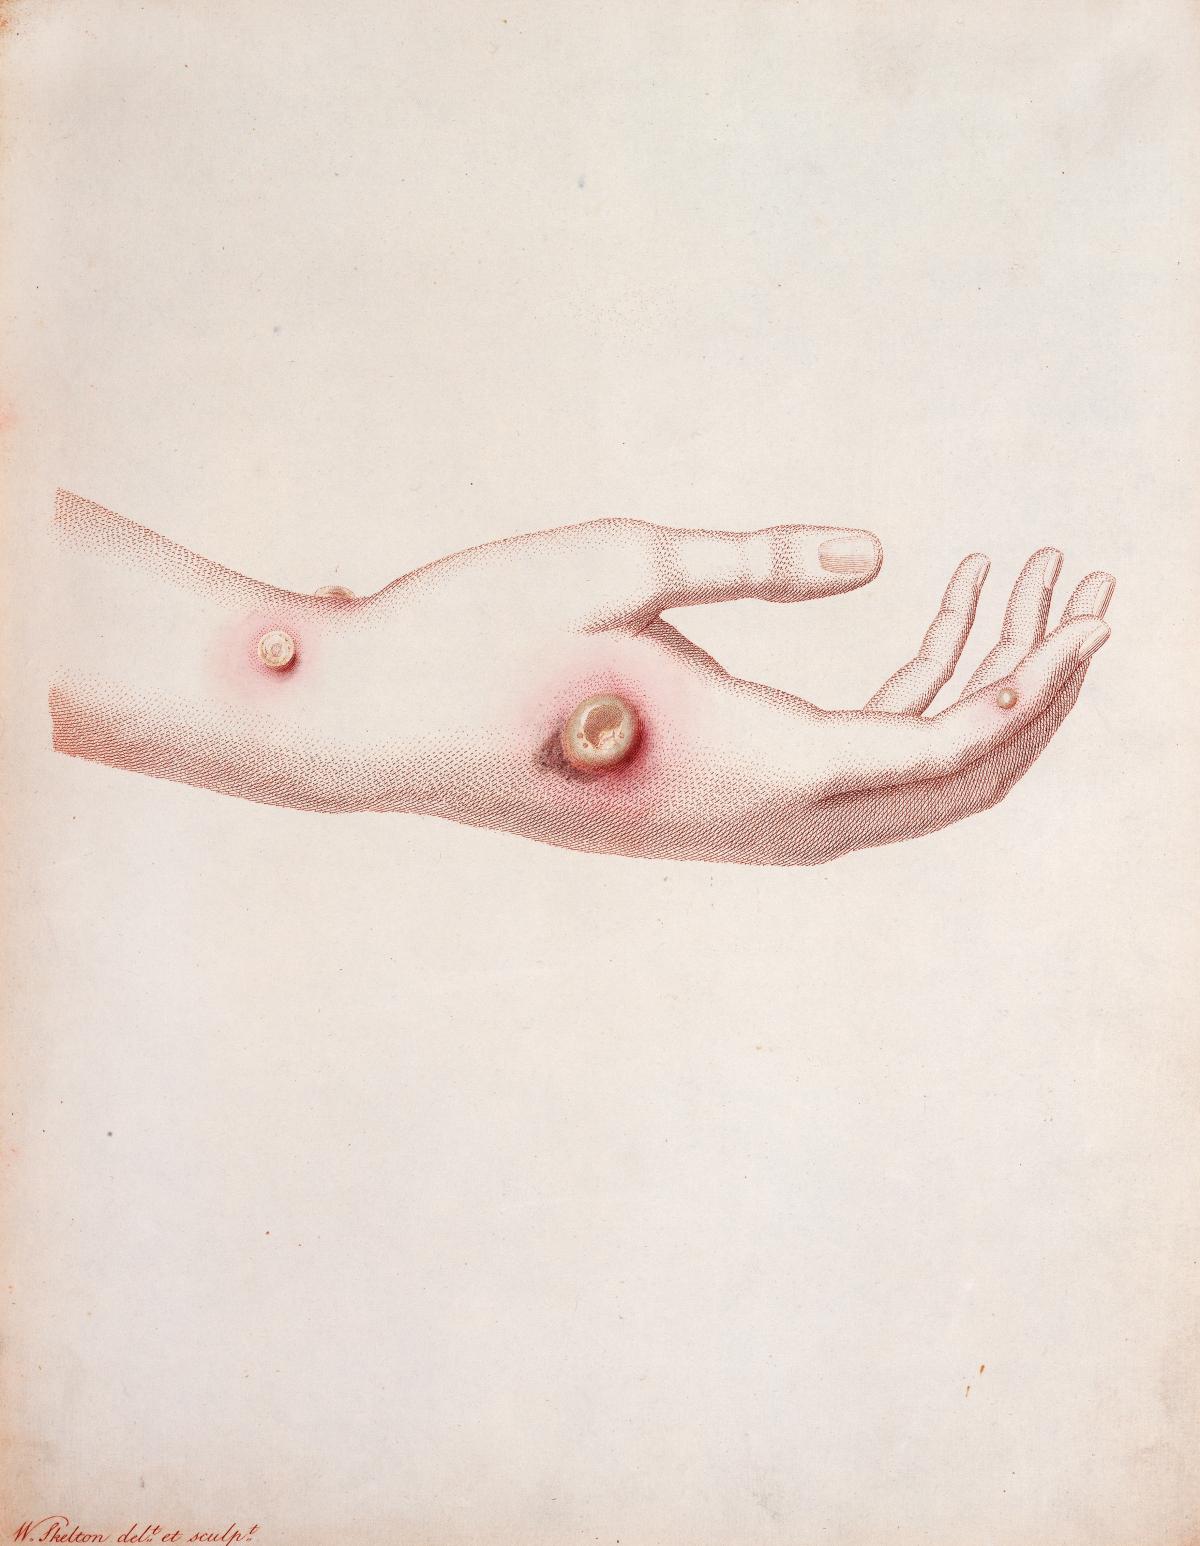 Illustration of red pustules on an outstretched hand